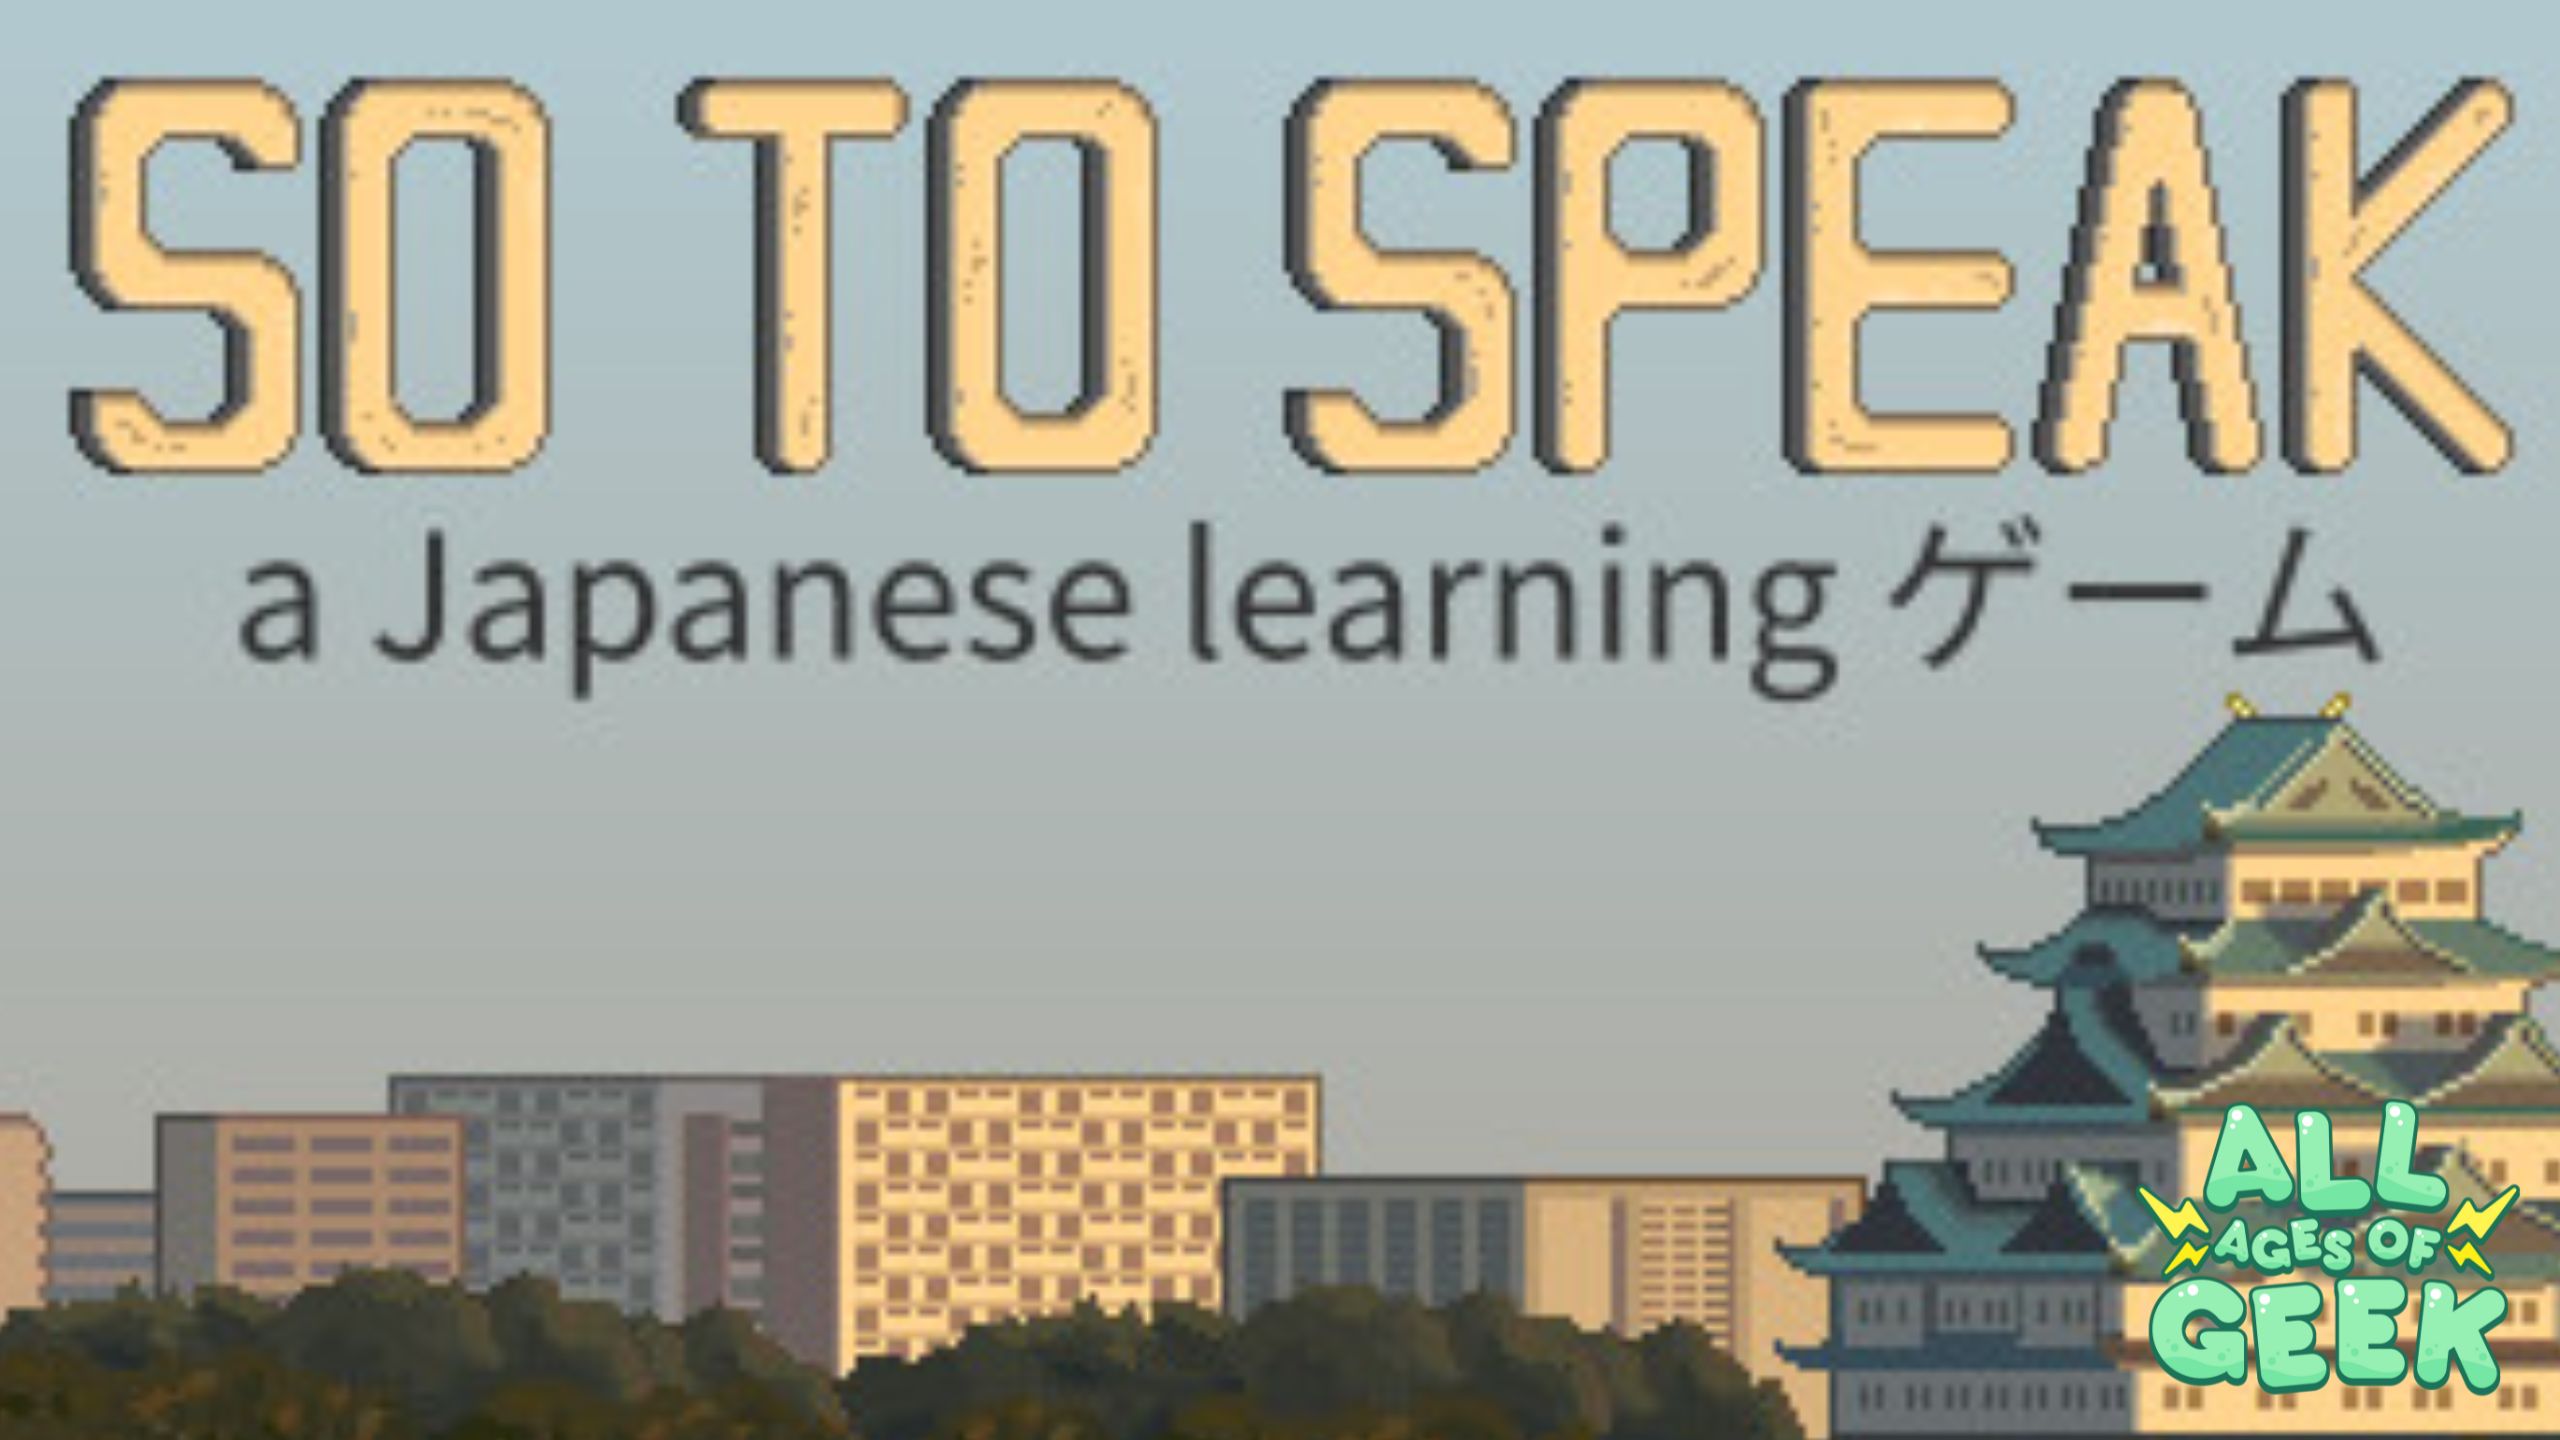 The logo for 'So To Speak' with the subtitle 'a Japanese learning ゲーム' (game). The background features a cityscape with buildings and a traditional Japanese castle. The All Ages of Geek logo is in the bottom right corner